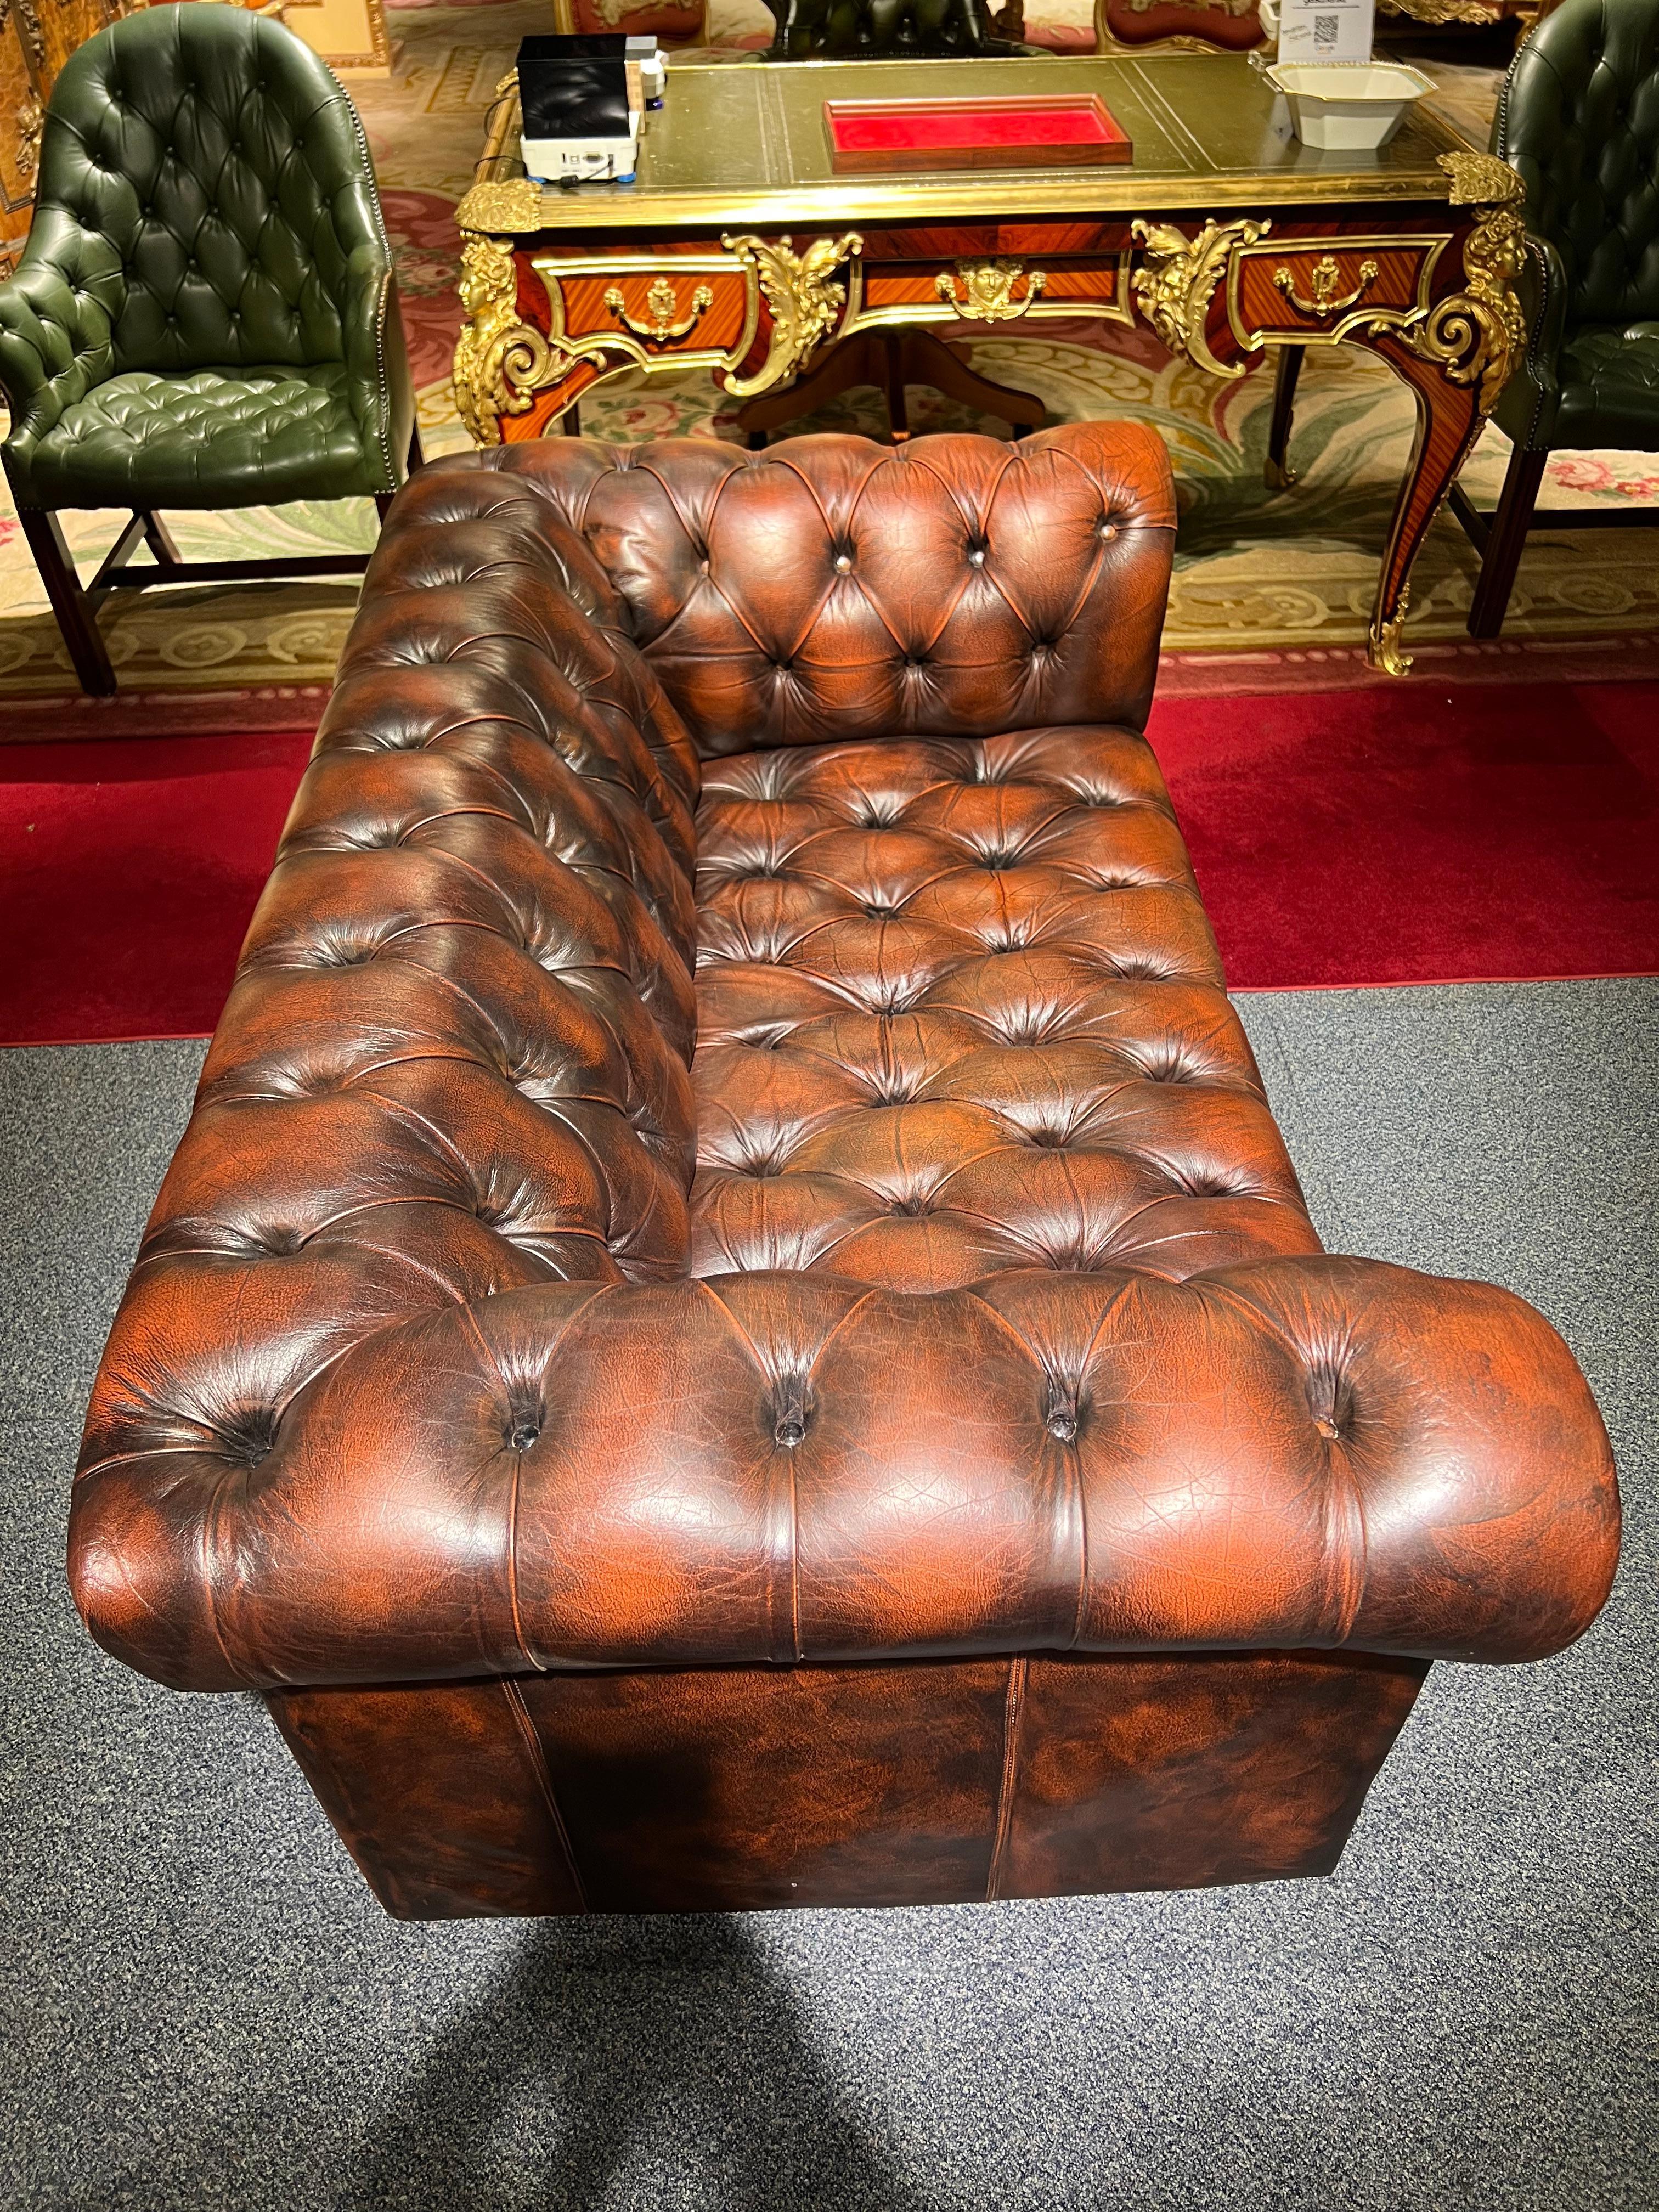 Stunning Vintage English Brown Leather Chesterfield Sofa fully tufted 5